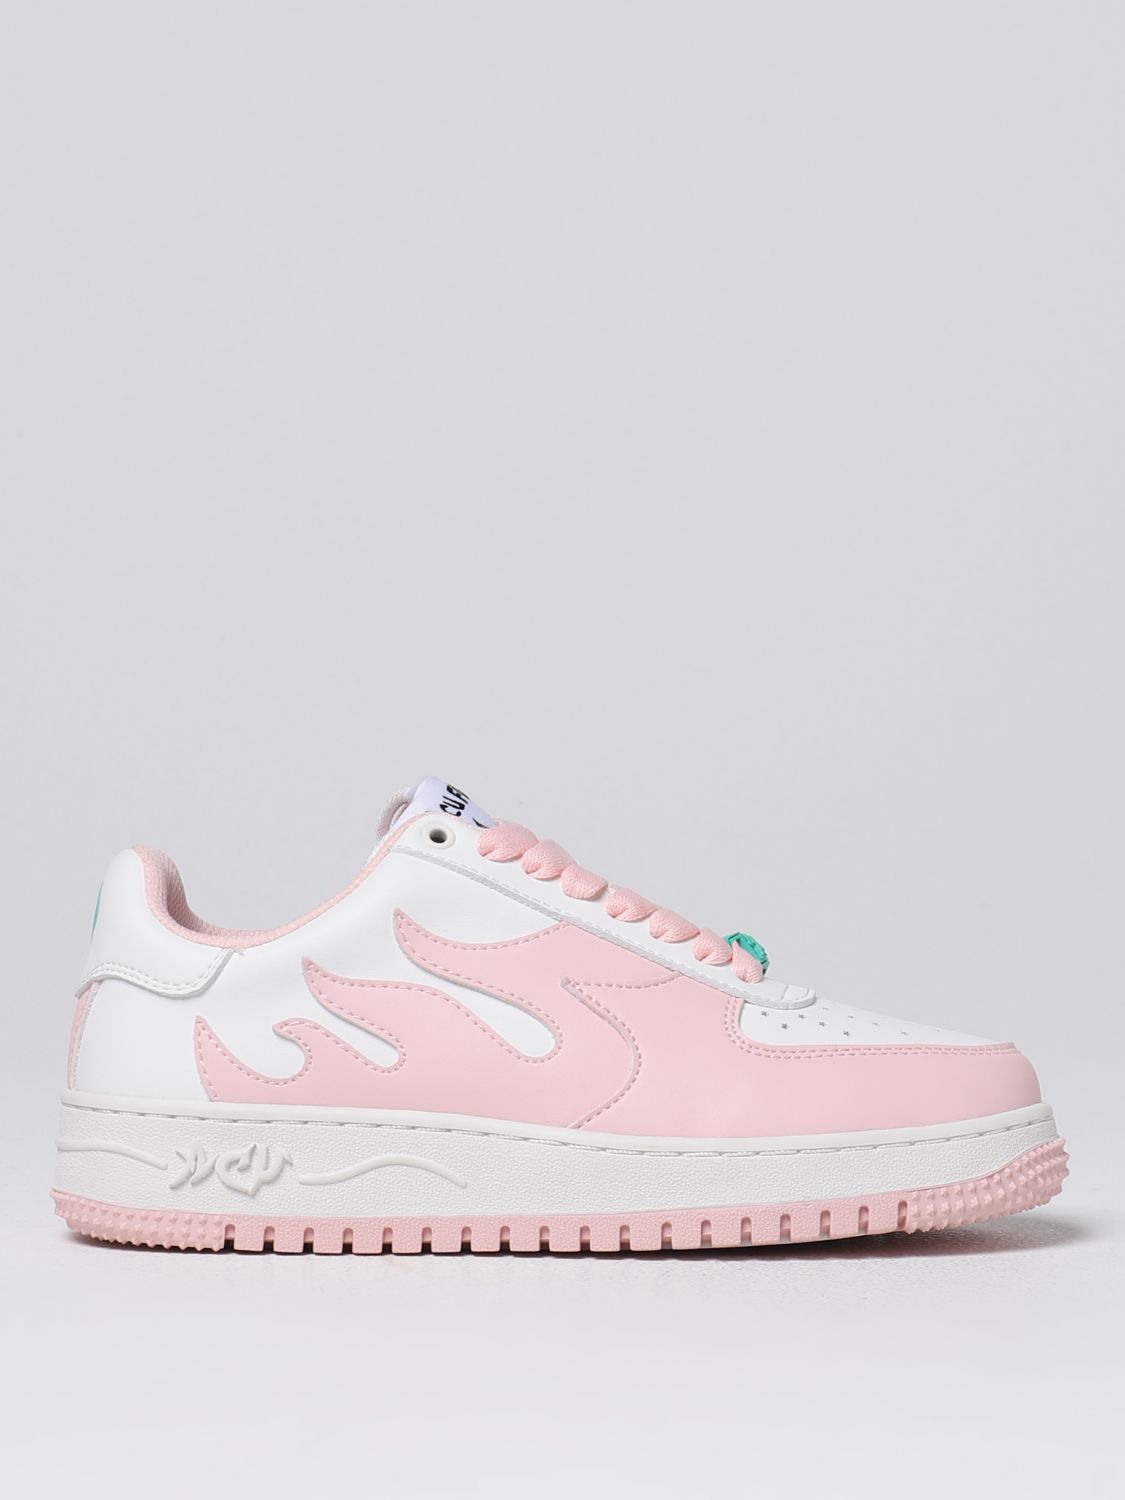 Acupuncture Acu Force Tech Spec White And Pink Leather Low Sneaker With Flames - Acu Force Tech Spec